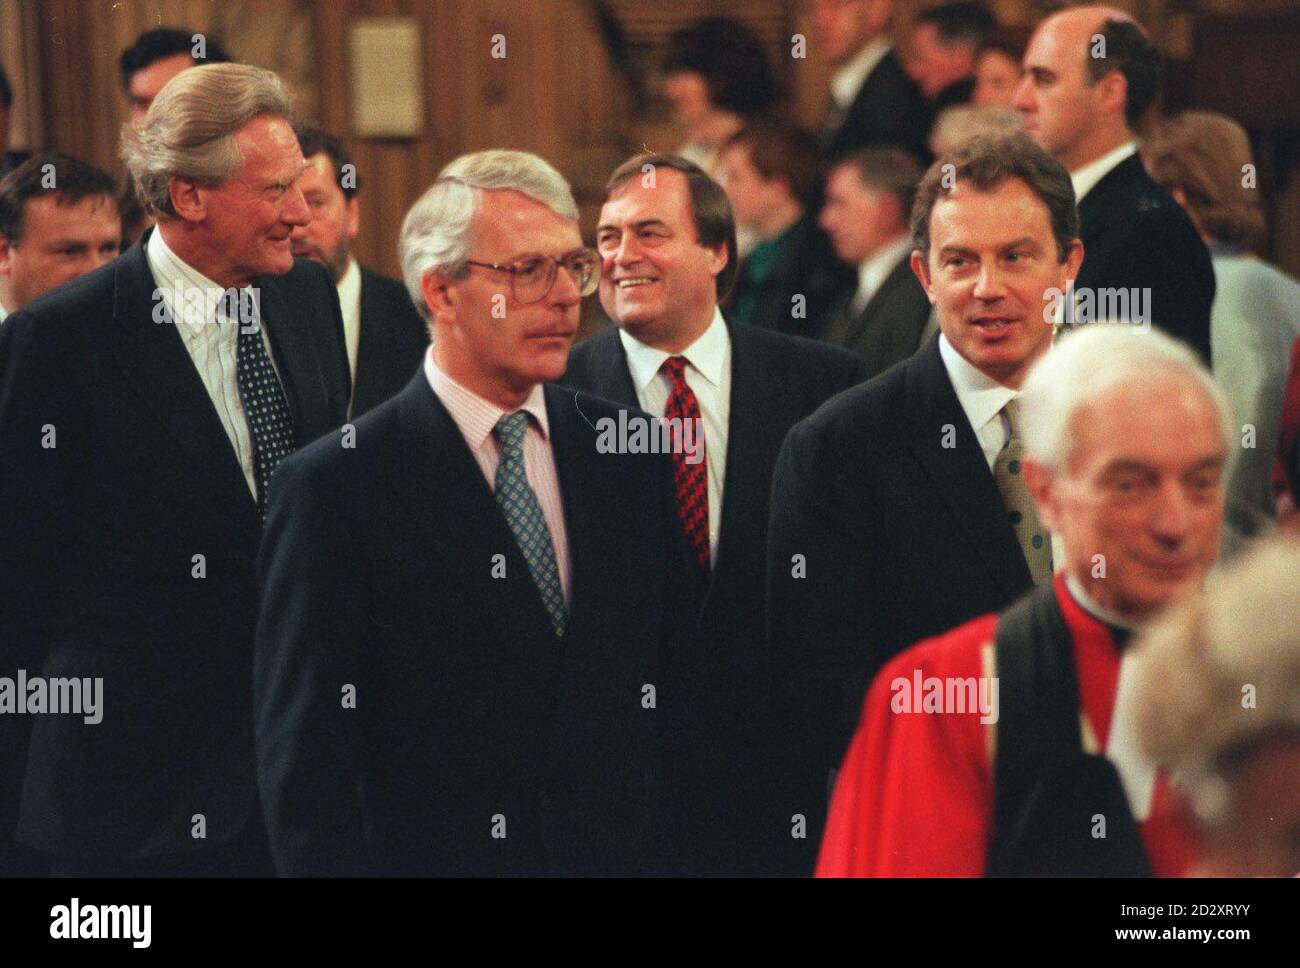 Times Rota Picture by Peter Nicholls. P.M. Tony Blair and John Major, followed by M.Heseltine and J.Prescott in Central Lobby after Queen's Speech at State Opening of Parliament. Stock Photo